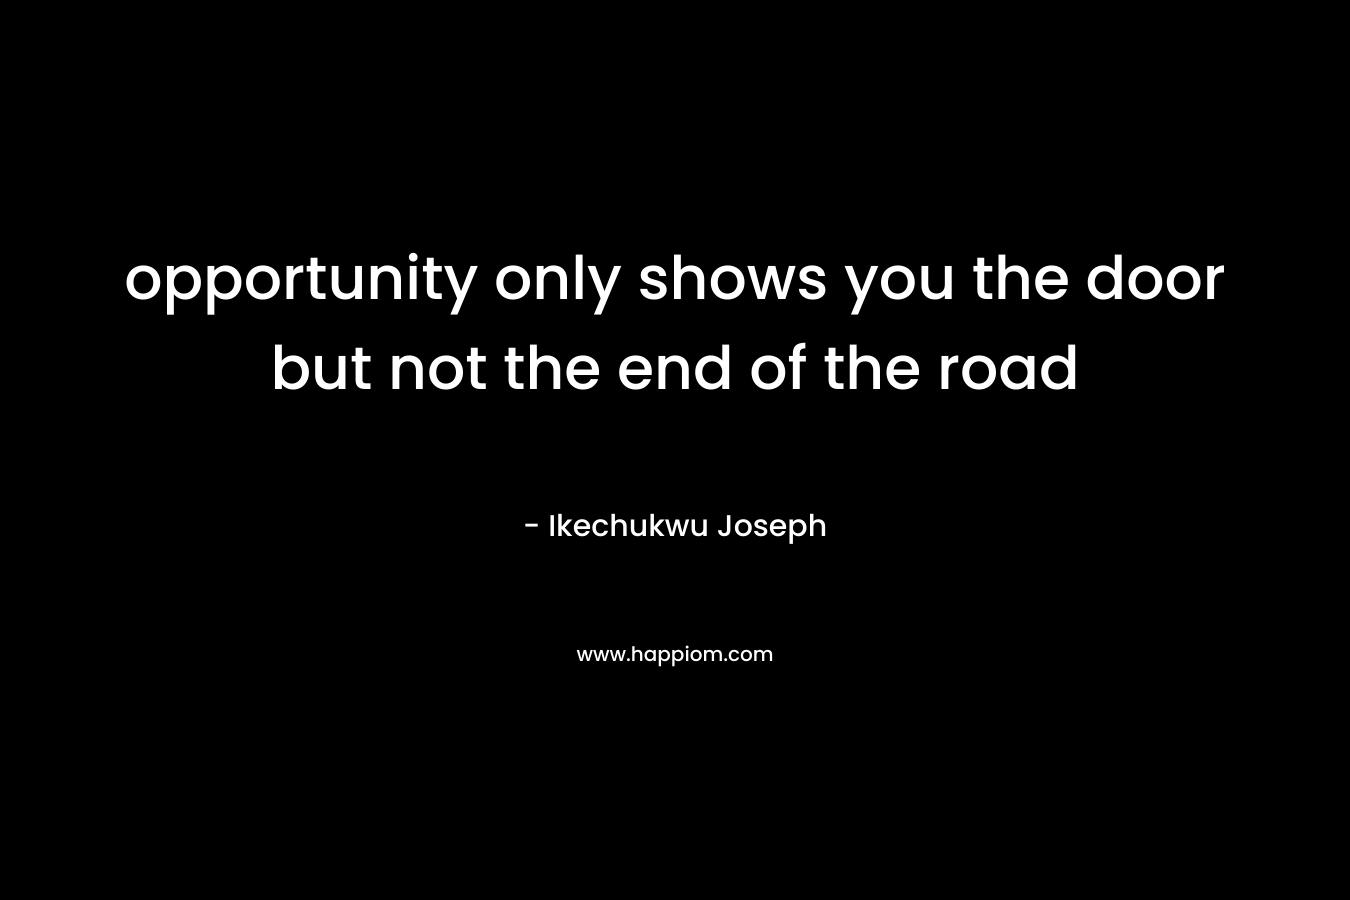 opportunity only shows you the door but not the end of the road